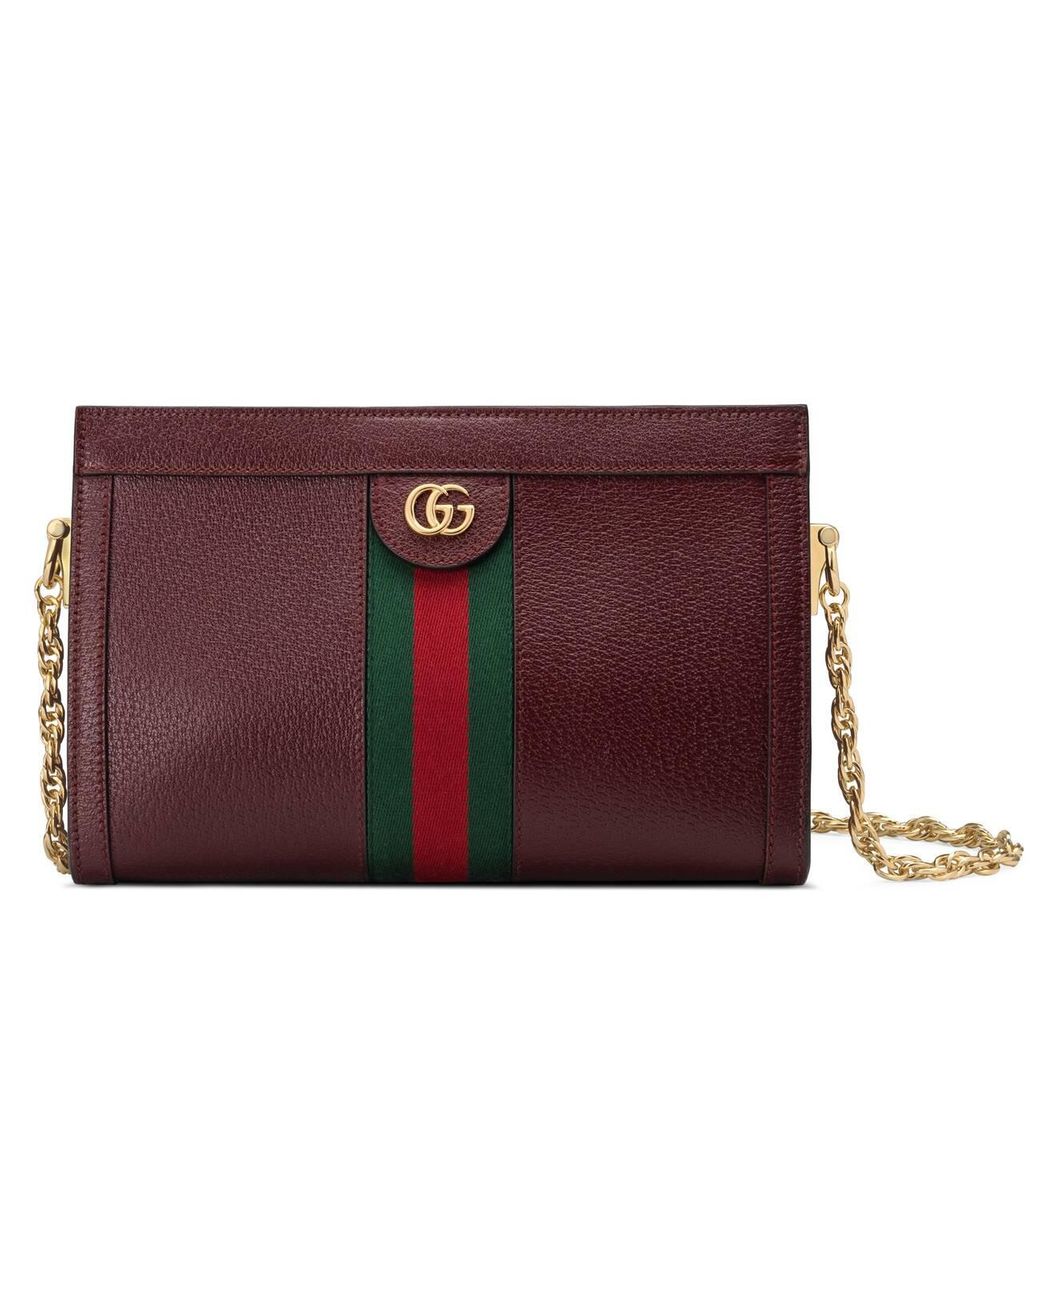 Gucci GG Marmont Shoulder Bag Diagonal Quilted Leather Small Red | eBay